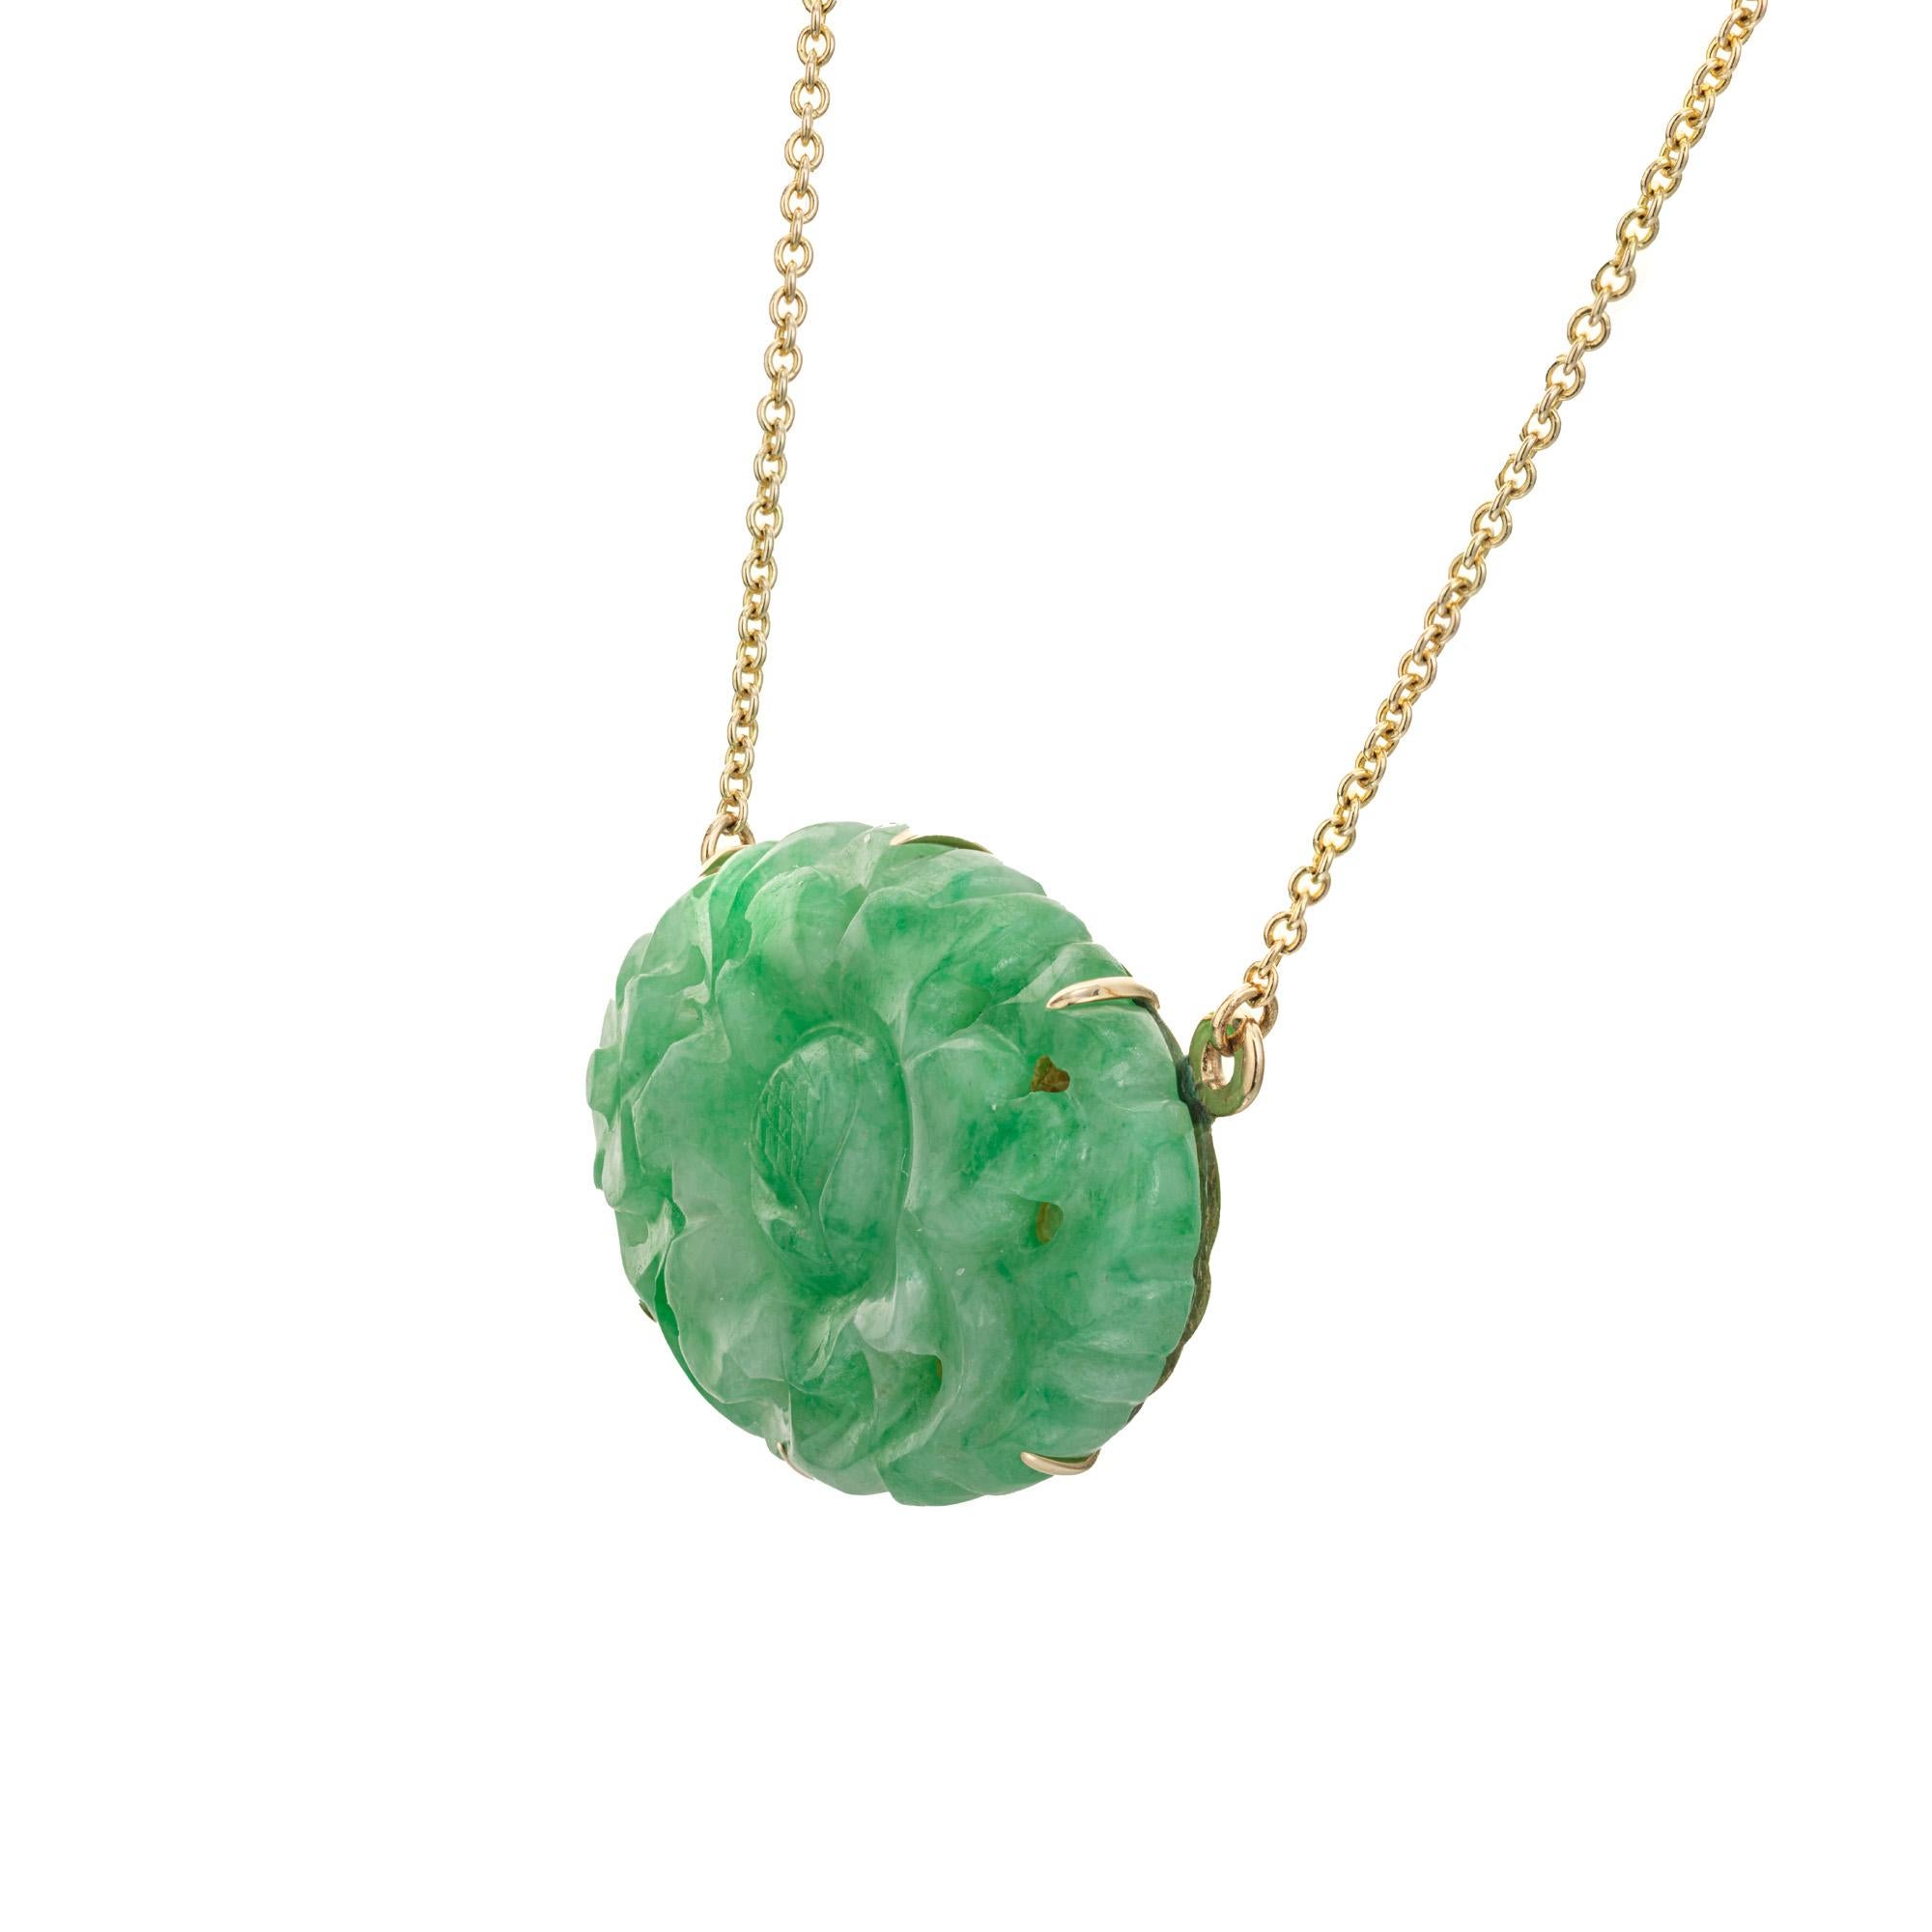 Natural untreated jadeite jade oval carved flower pendant. GIA certified A grade oval carved and pierced mottled jade with a 19 inch yellow gold chain. 

1 oval pierced carved mottled green jadeite jade, GIA Certificate# 6223168161
14k yellow gold